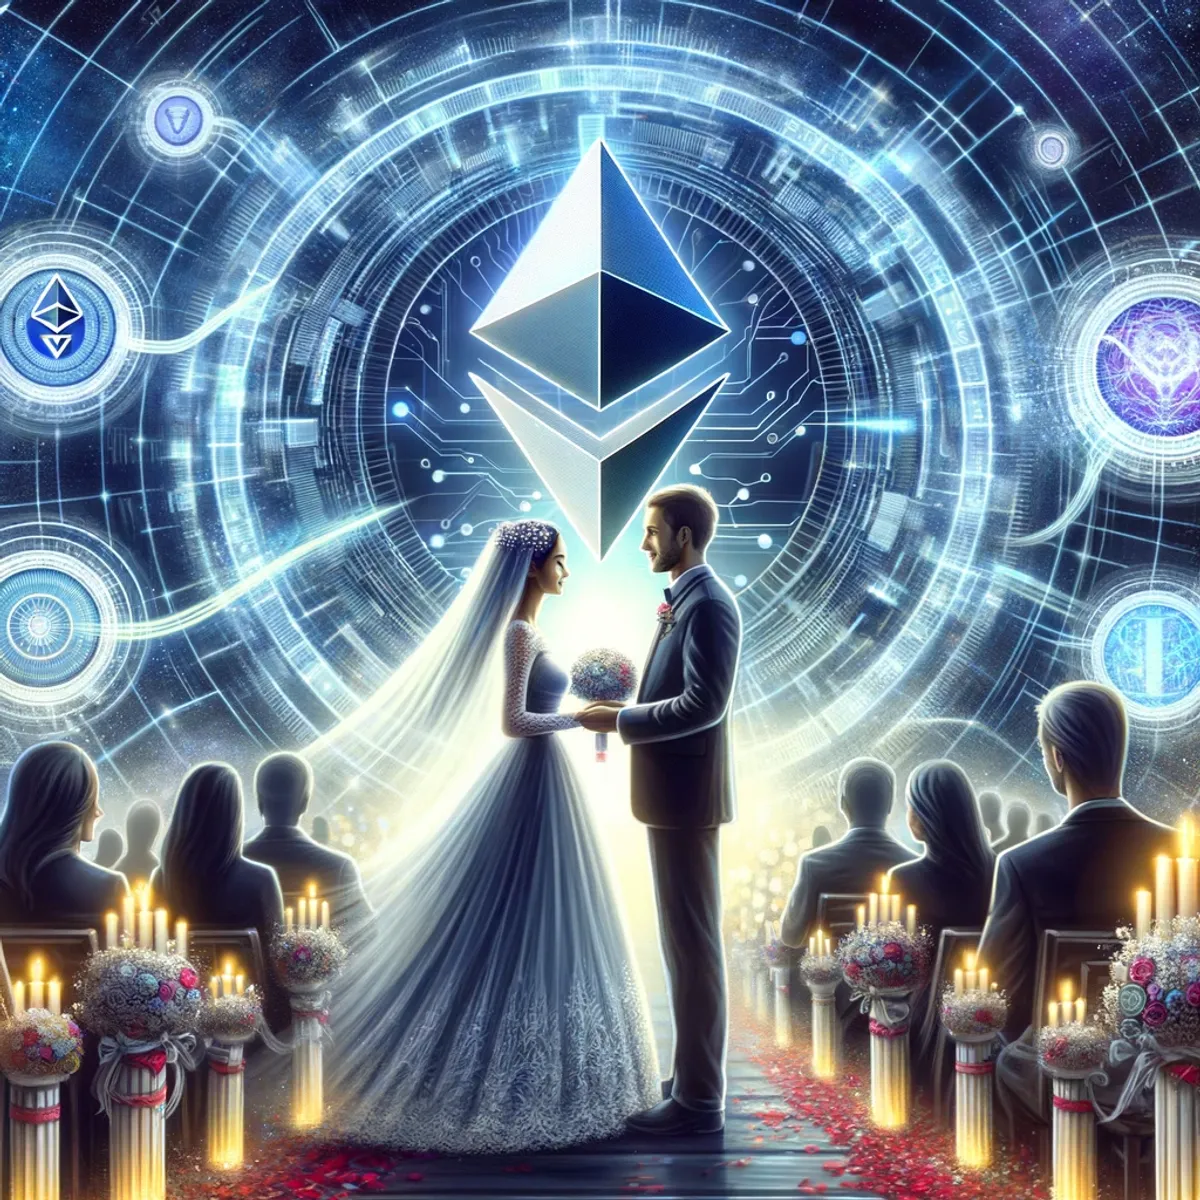 Buying Ethereum on Mt Pelerin and get married on the blockchain